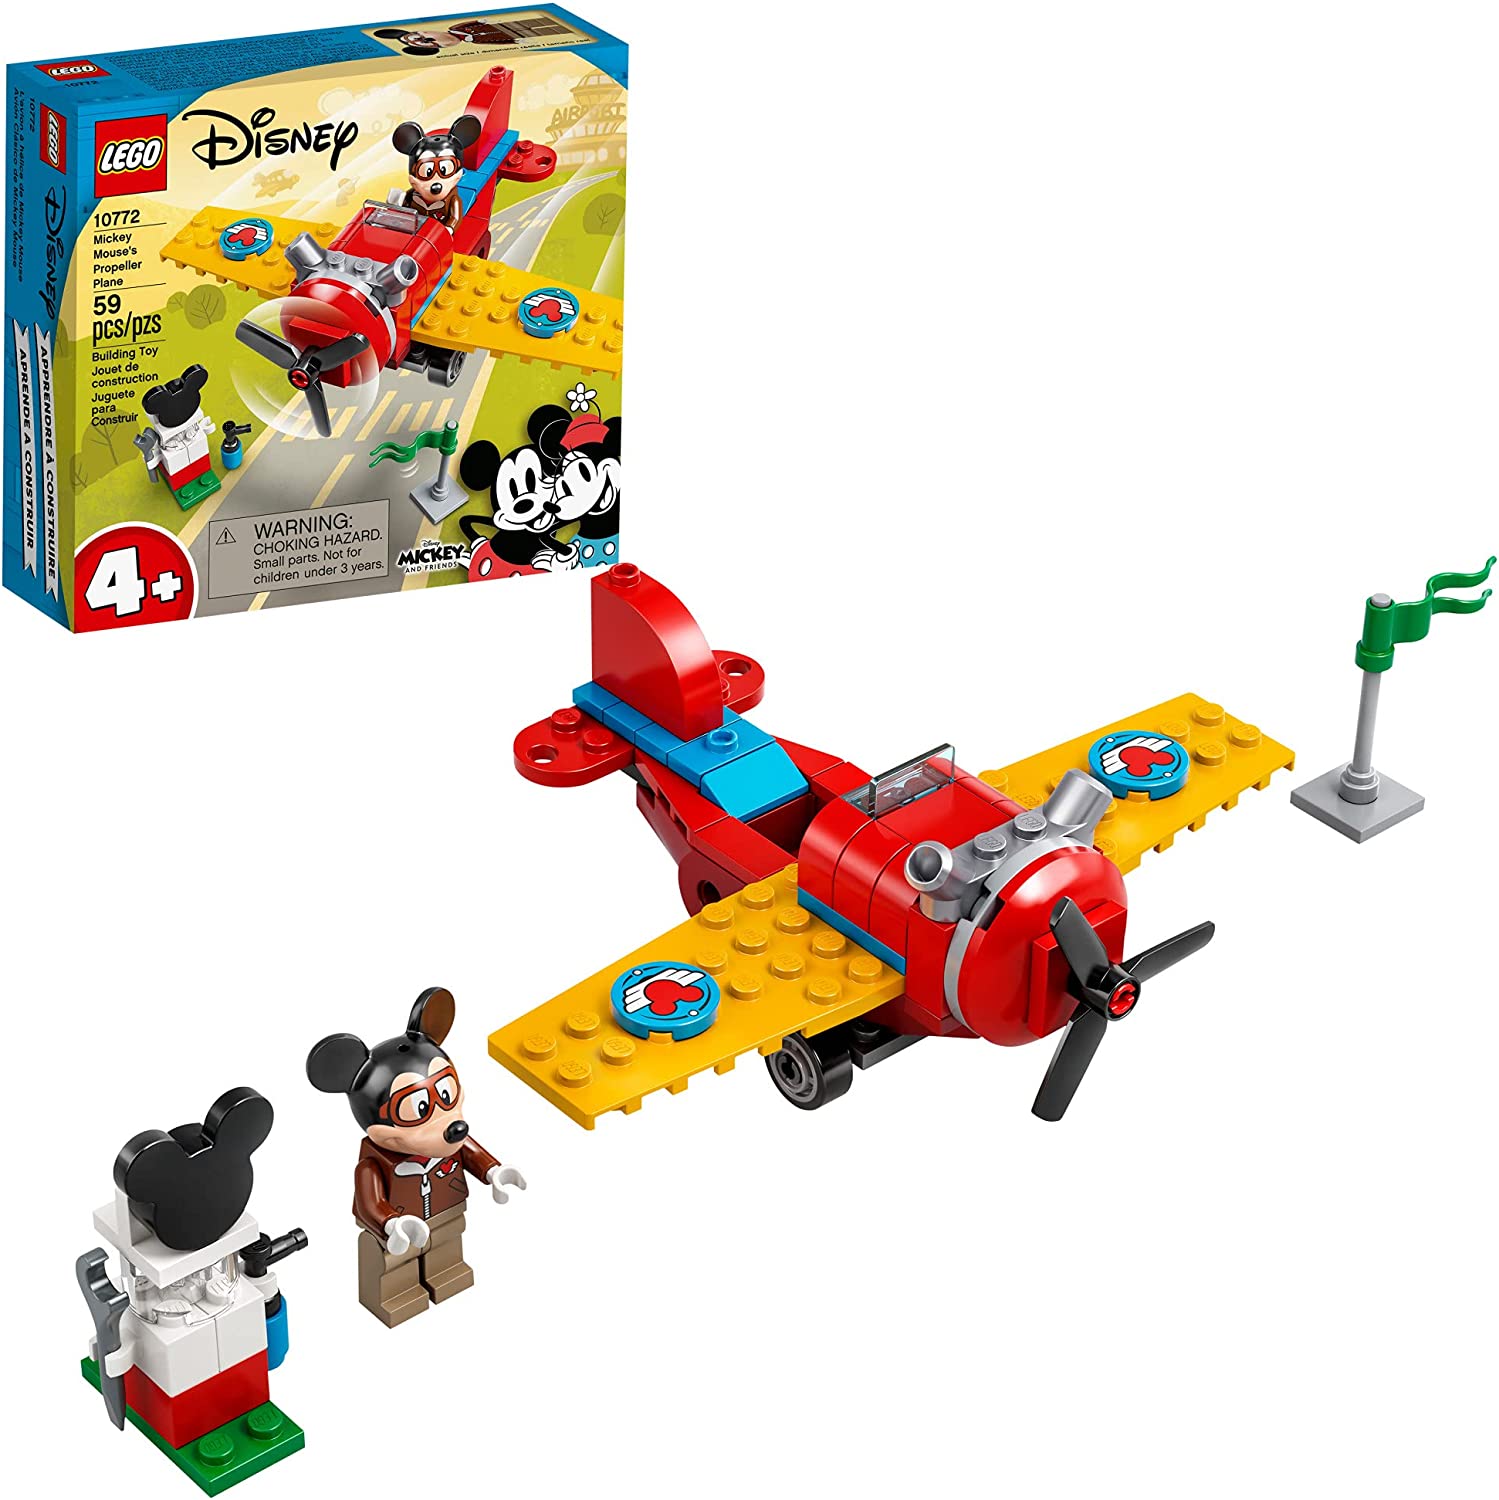 59-Pc LEGO Disney Mickey Mouse's Propeller Plane Building Playset $7 + Free Shipping w/ Walmart+ or on $35+